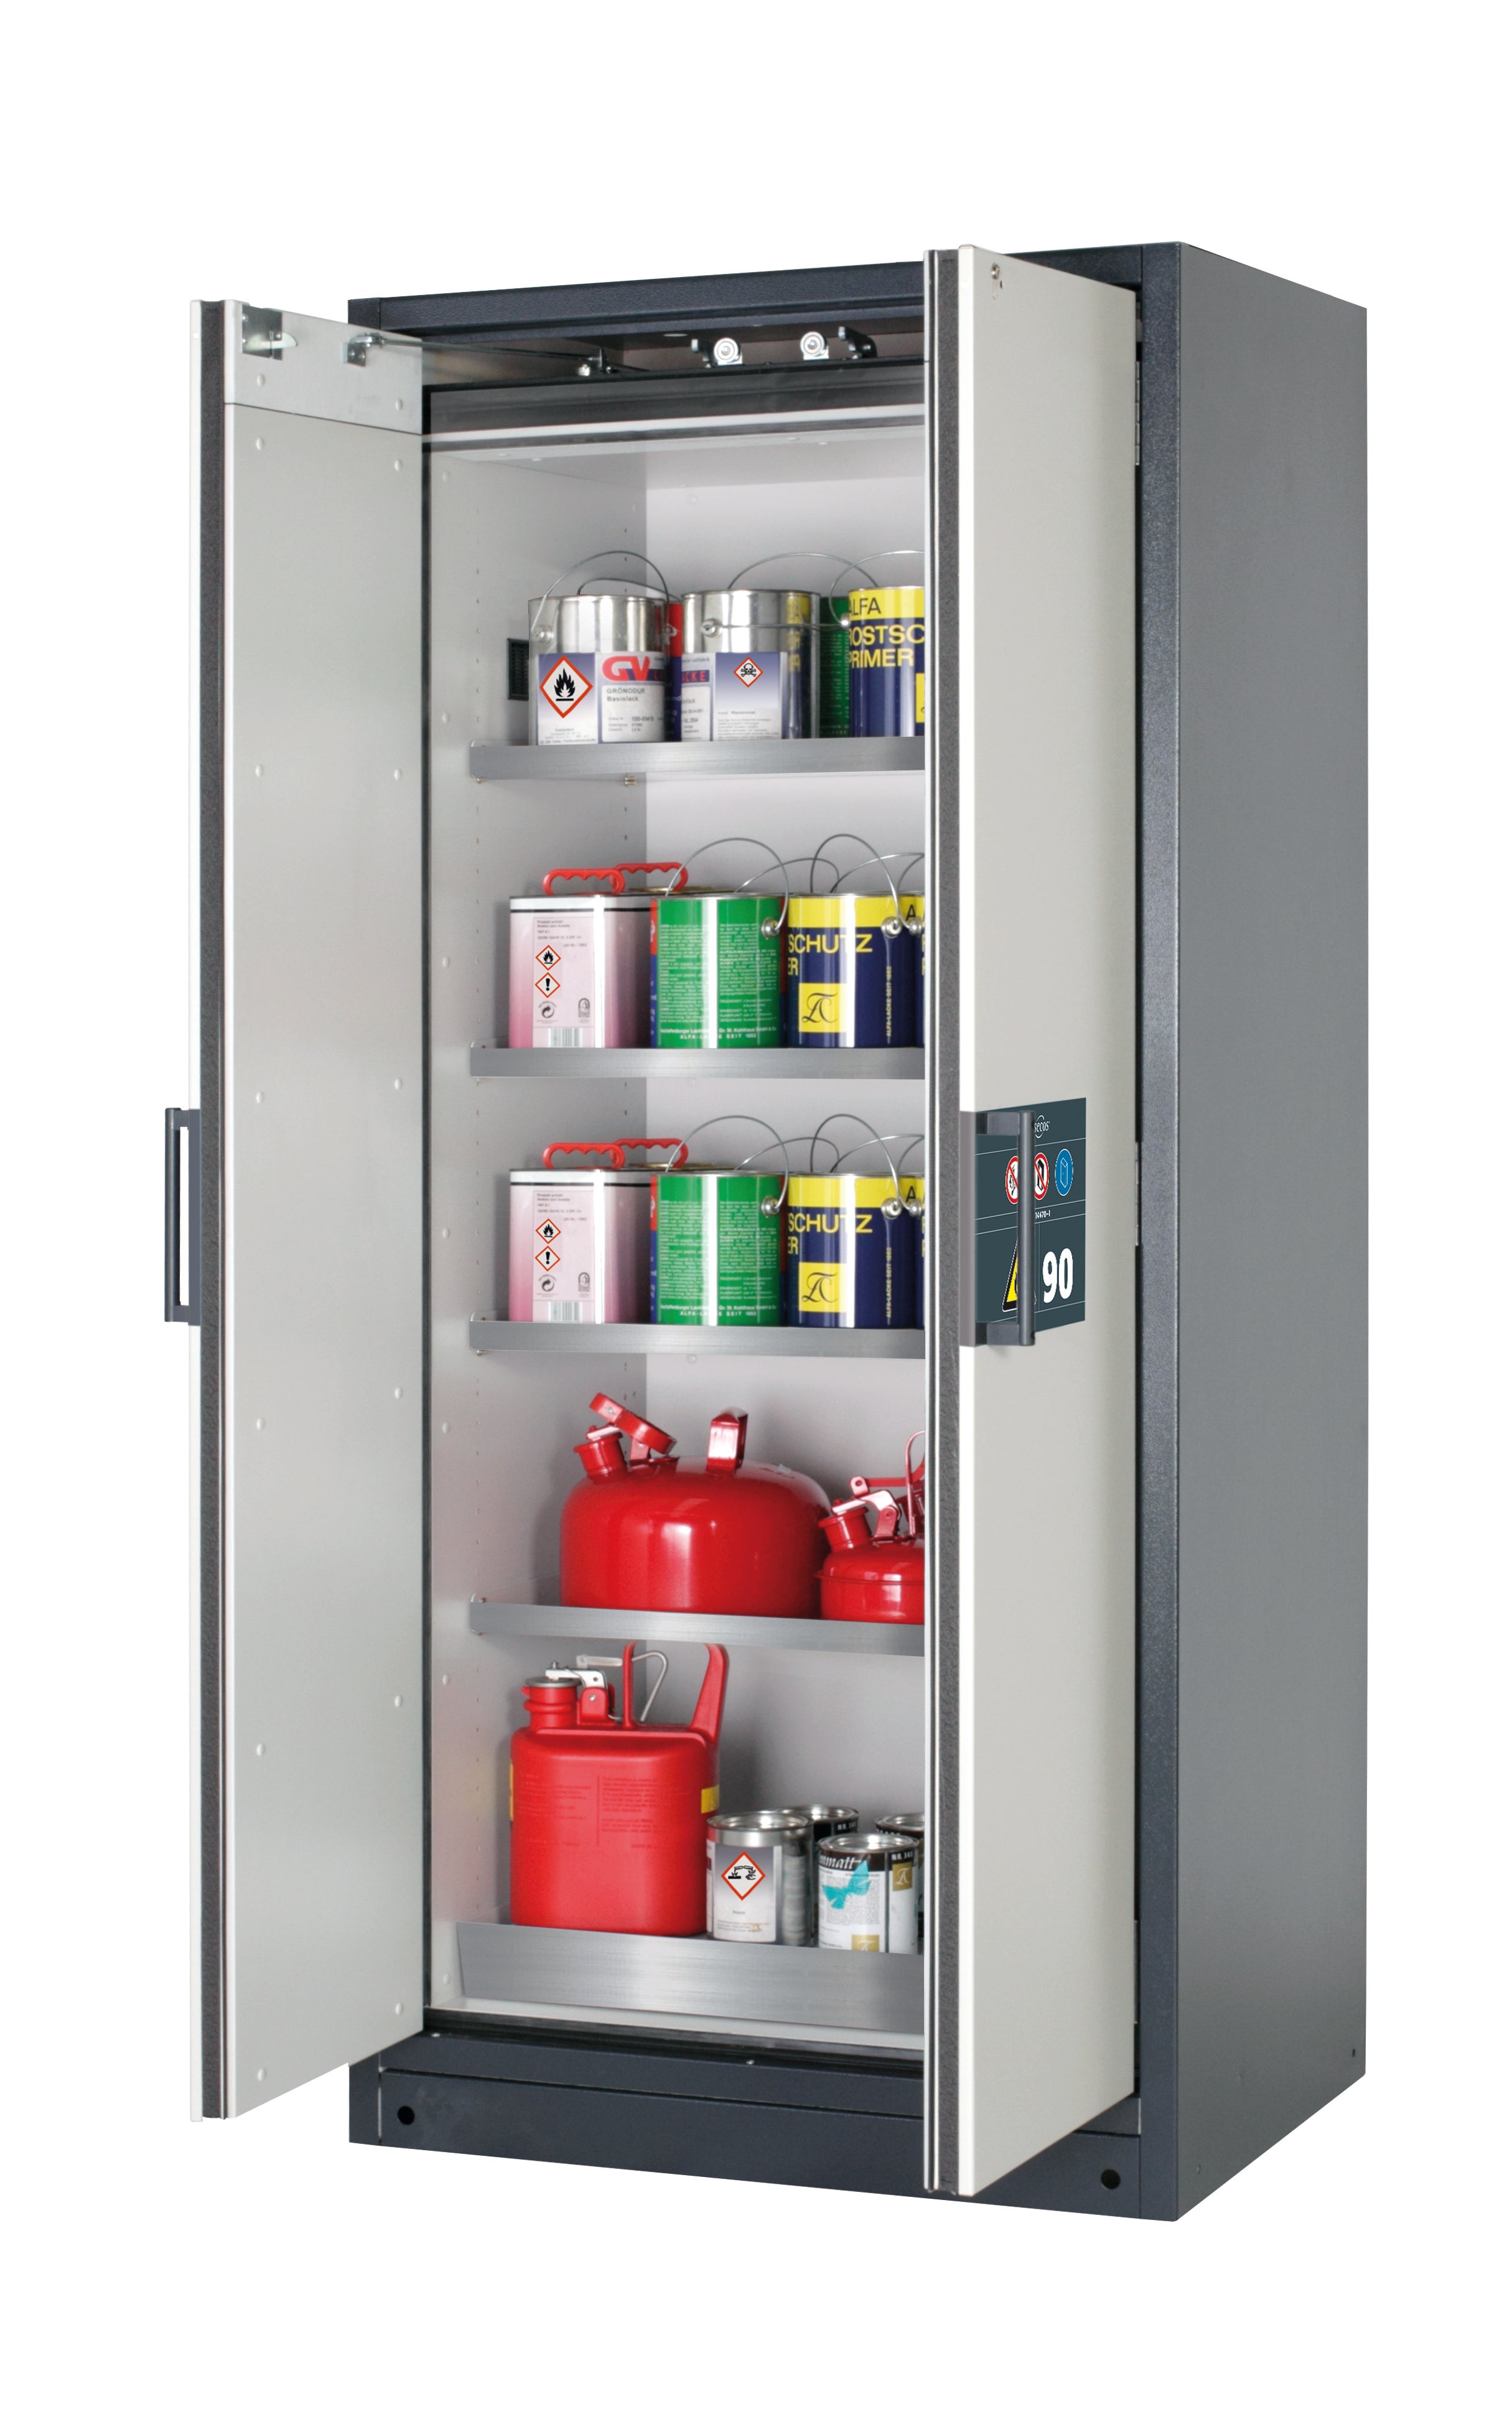 Type 90 safety storage cabinet Q-CLASSIC-90 model Q90.195.090 in light grey RAL 7035 with 4x shelf standard (stainless steel 1.4301),